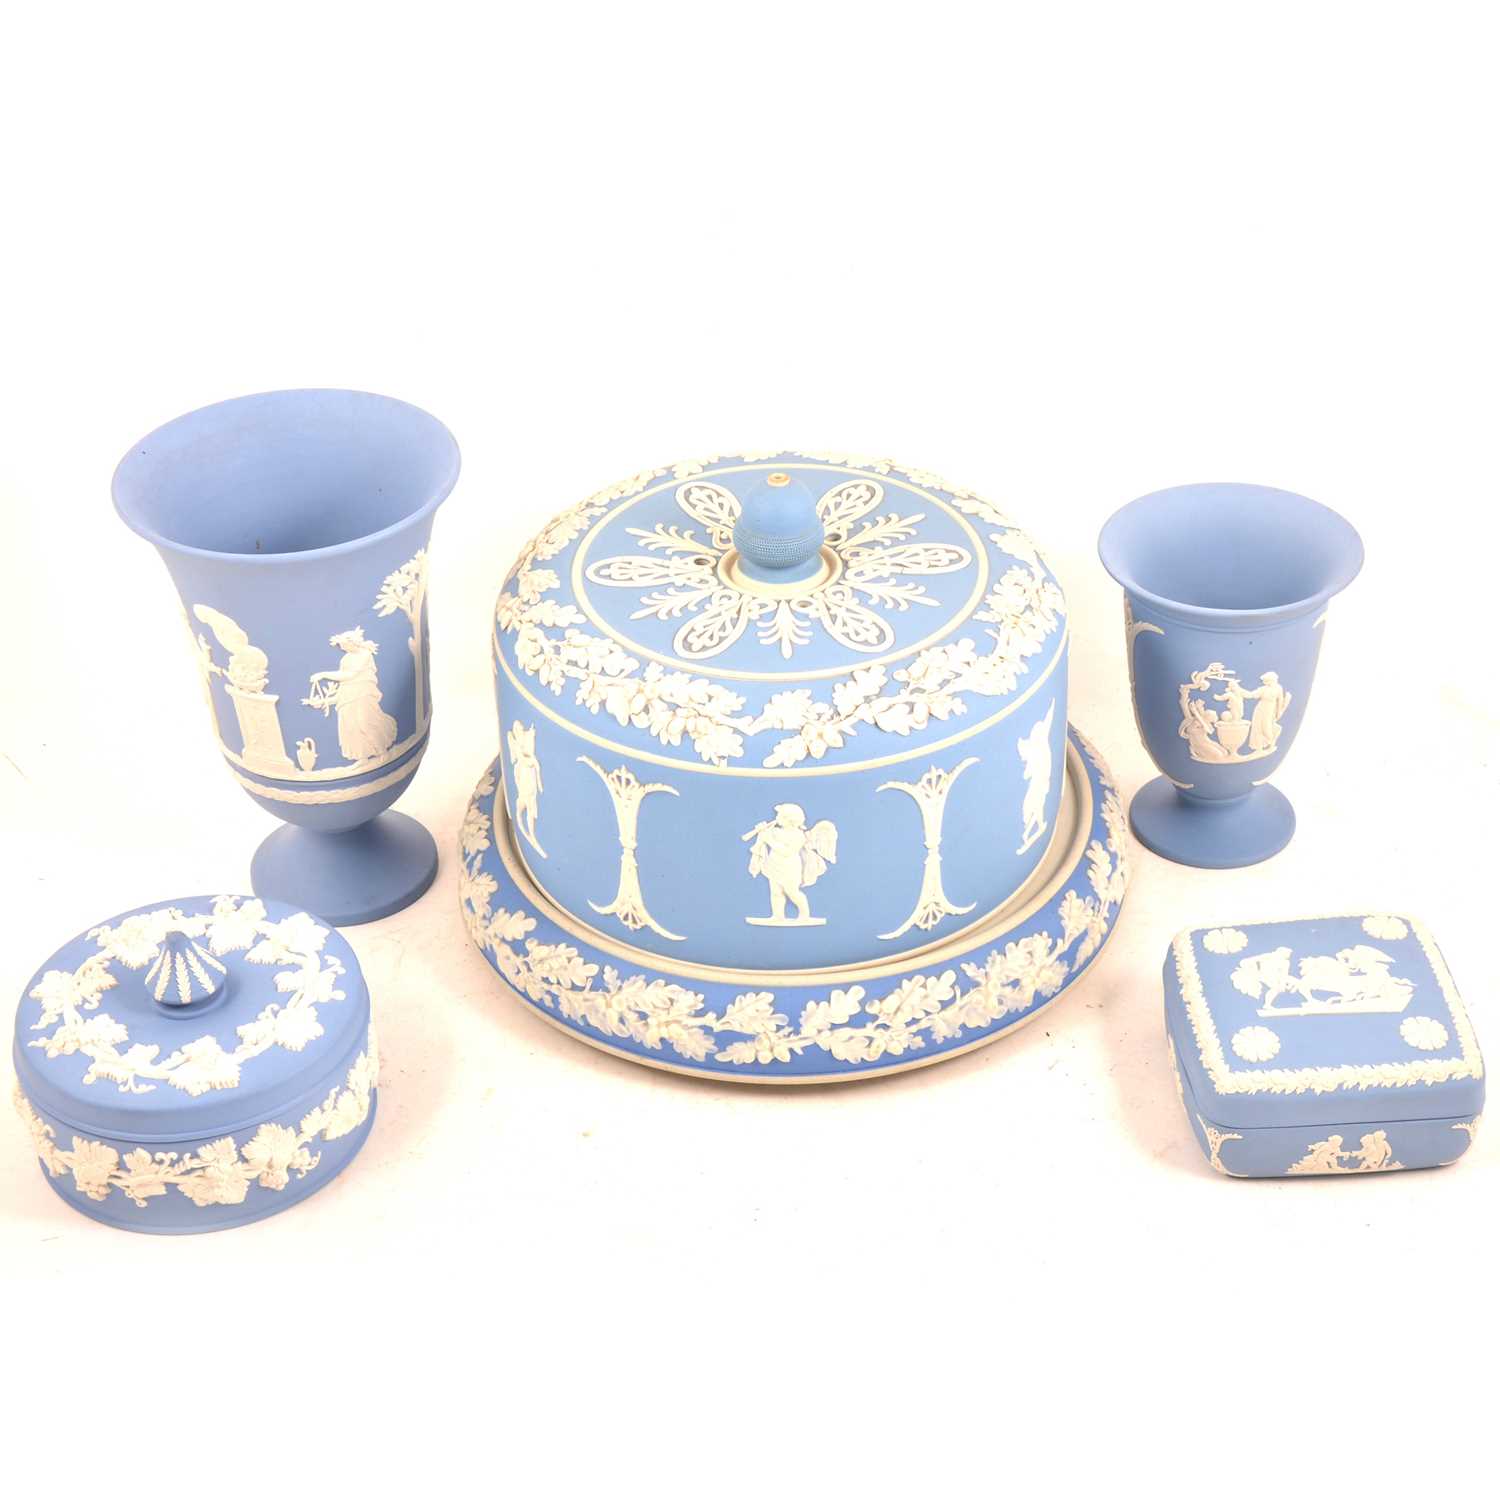 Lot 83 - A Wedgwood Blue Jasperware cheese dish and cover, together with a collection of modern Blue Jasperware